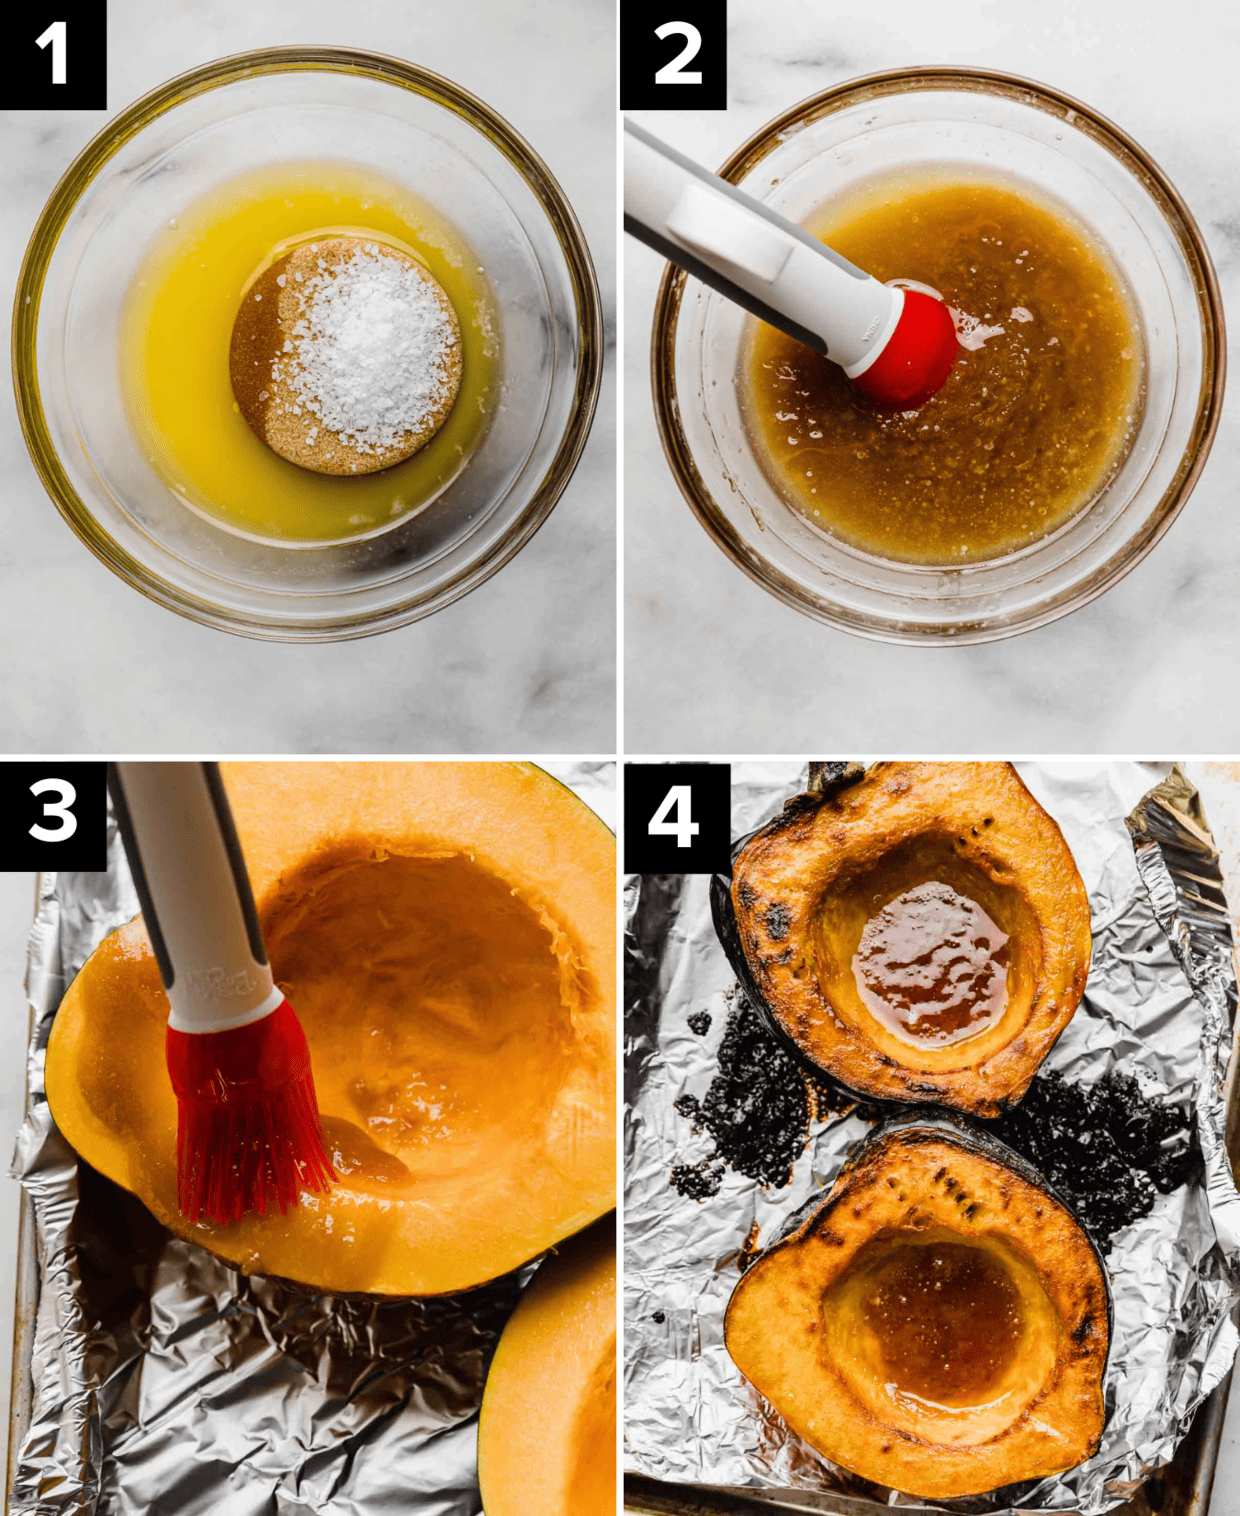 Four photos showing the process of how to make the best brown sugar roasted acorn squash recipe, top left image is butter, brown sugar and salt in a glass bowl, top right image shows the brown sugar butter mixture being mixed, bottom left photo is a pastry brush spreading the brown sugar mixture over acorn squash flesh, bottom right image is final photo of roasted acorn squash on a baking sheet.